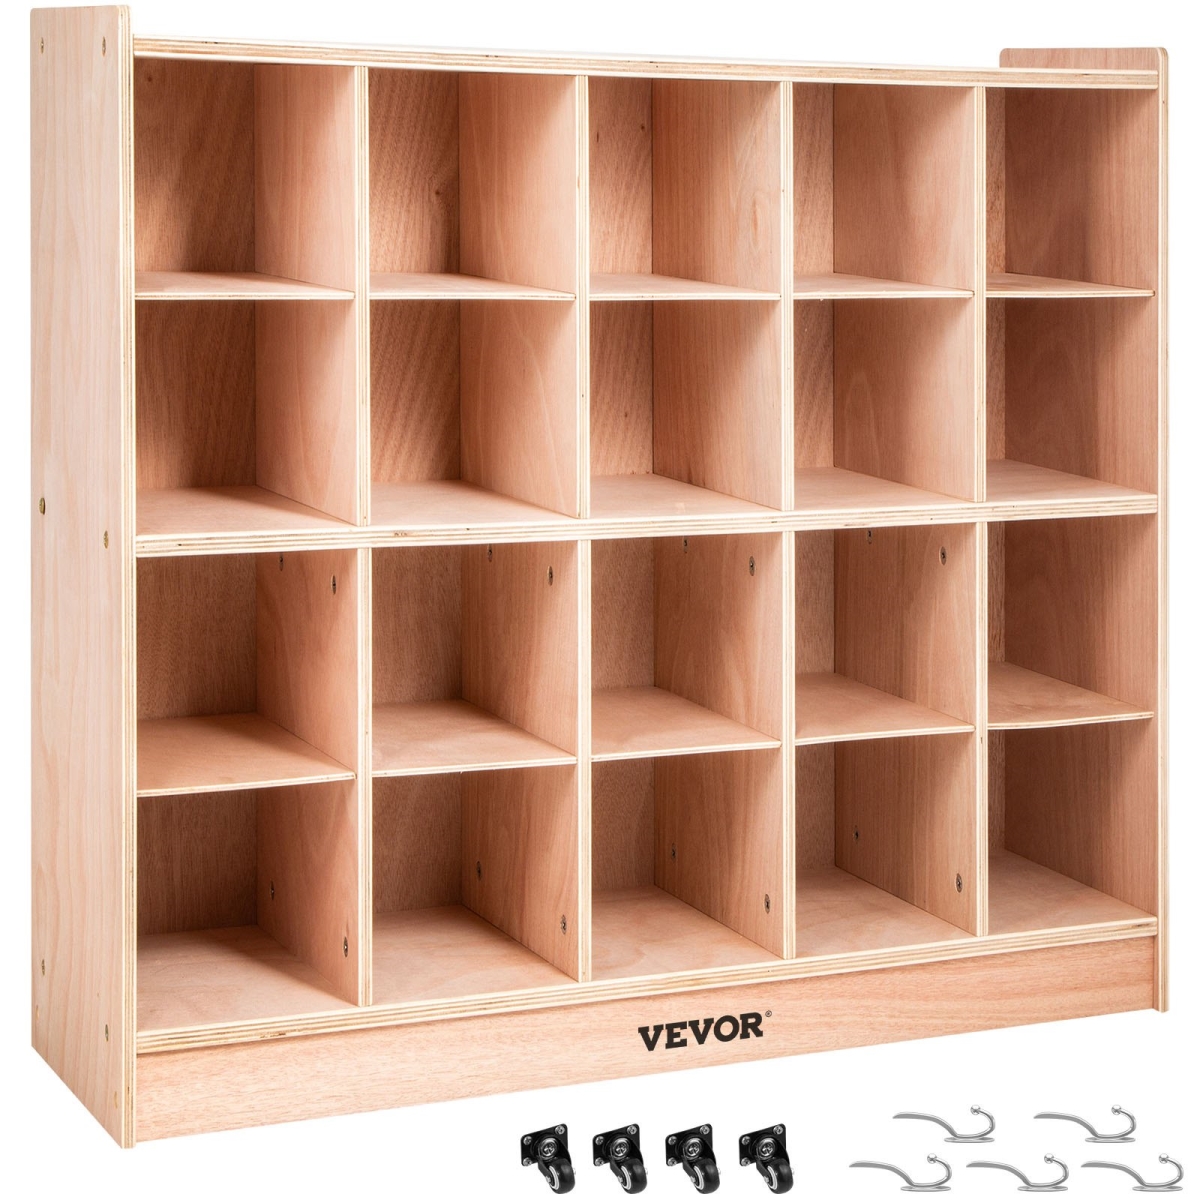 Picture of Vevor CWG20GWJCWG000001V0 20 Cubby Wooden Storage Unit